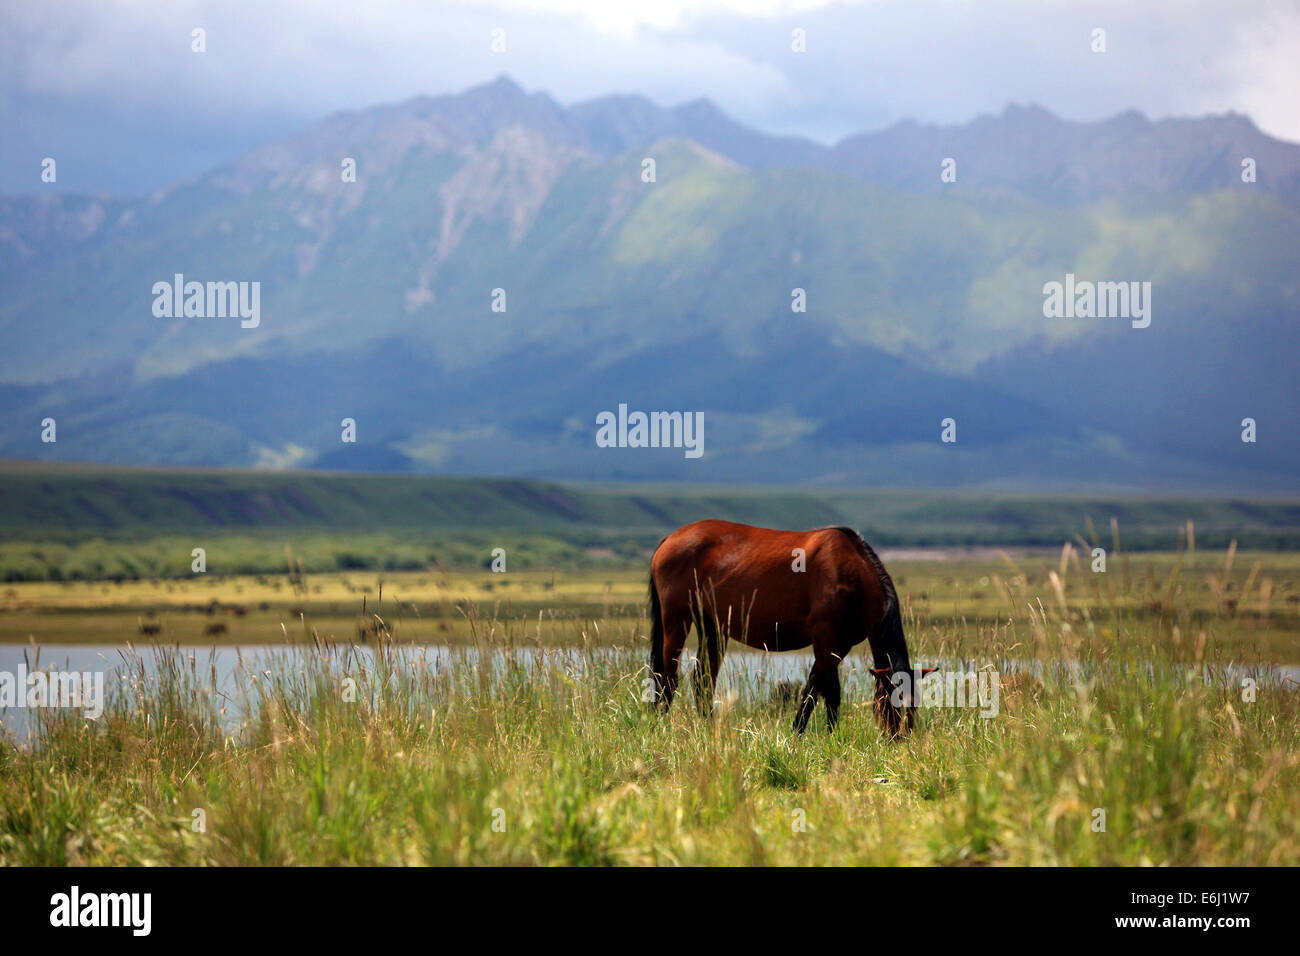 (140825) -- ZHANGYE, Aug. 25, 2014 (Xinhua) -- A horse grazes at the Shandan Horse Ranch in Zhangye City, northwest China's Gansu Province, Aug. 23, 2014. The Shandan Horse Ranch, which locates in the Qilian Mountain's Damayin pastureland, covers an area of 219,693 hectares. The history of the ranch can be traced back to 121 B.C. when famous Chinese general Huo Qubing established the ranch specially to herd horses for the army of China. Since then, the ranch, which was well-known for the Shandan horse hybrids, has therefore been the base of the military and royal horses through several dynasti Stock Photo